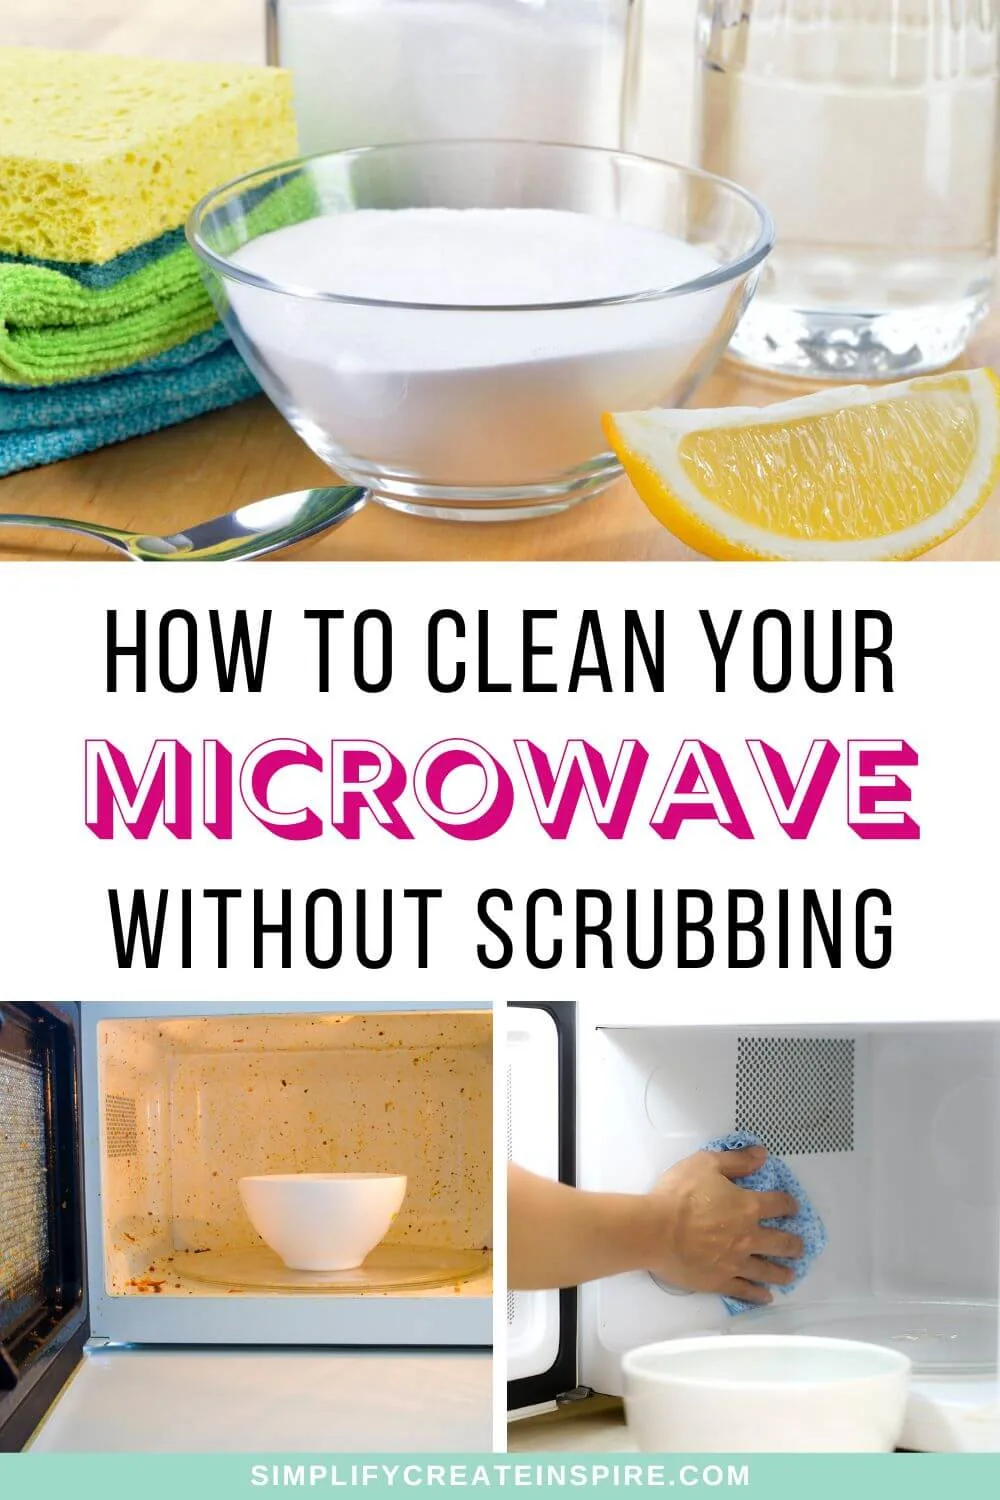 https://www.simplifycreateinspire.com/wp-content/uploads/2015/01/how-to-clean-a-microwave-cleaning-hack-1.jpg.webp